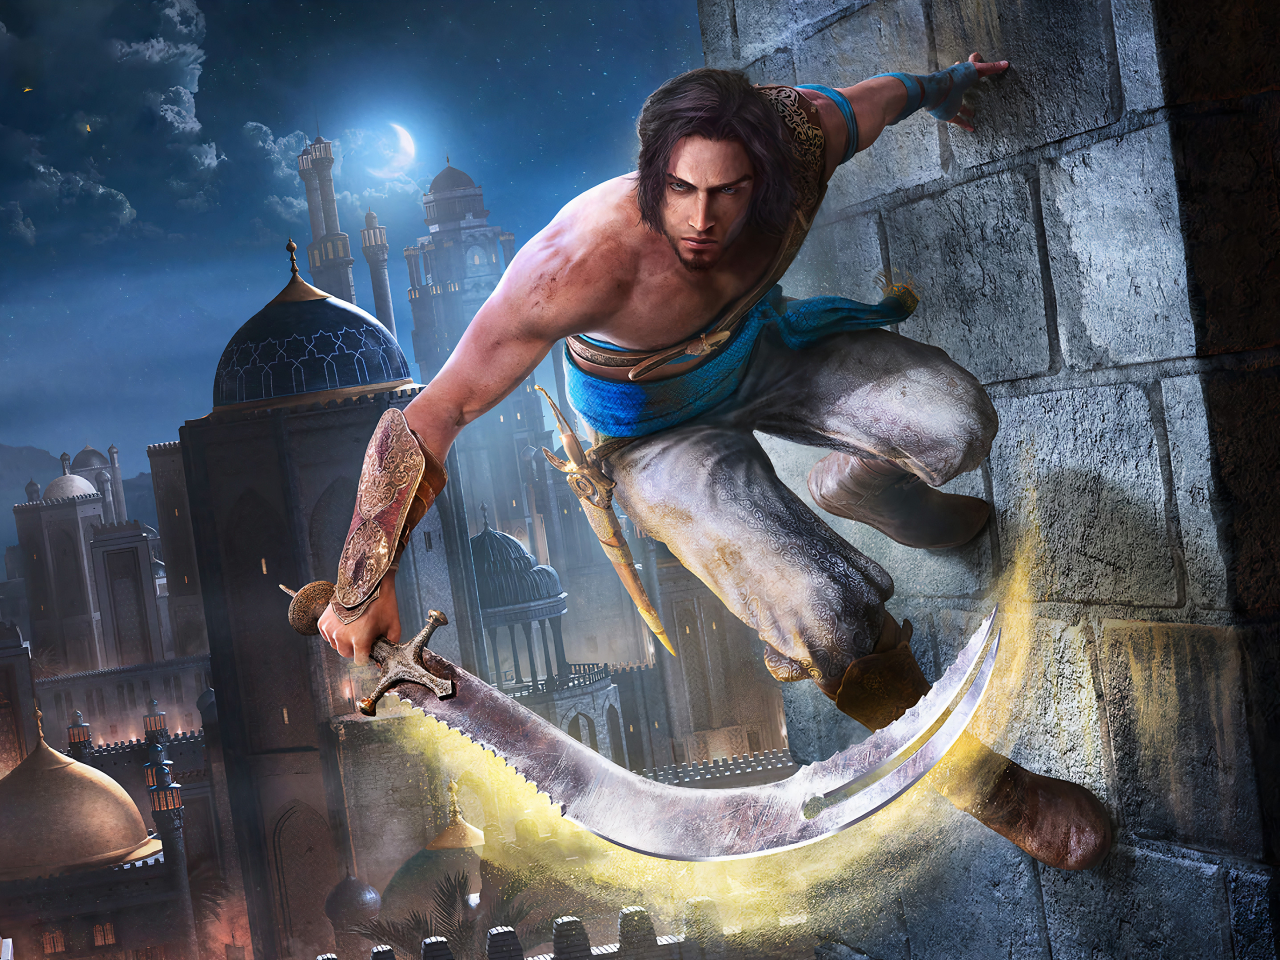 prince of persia sands of time movie